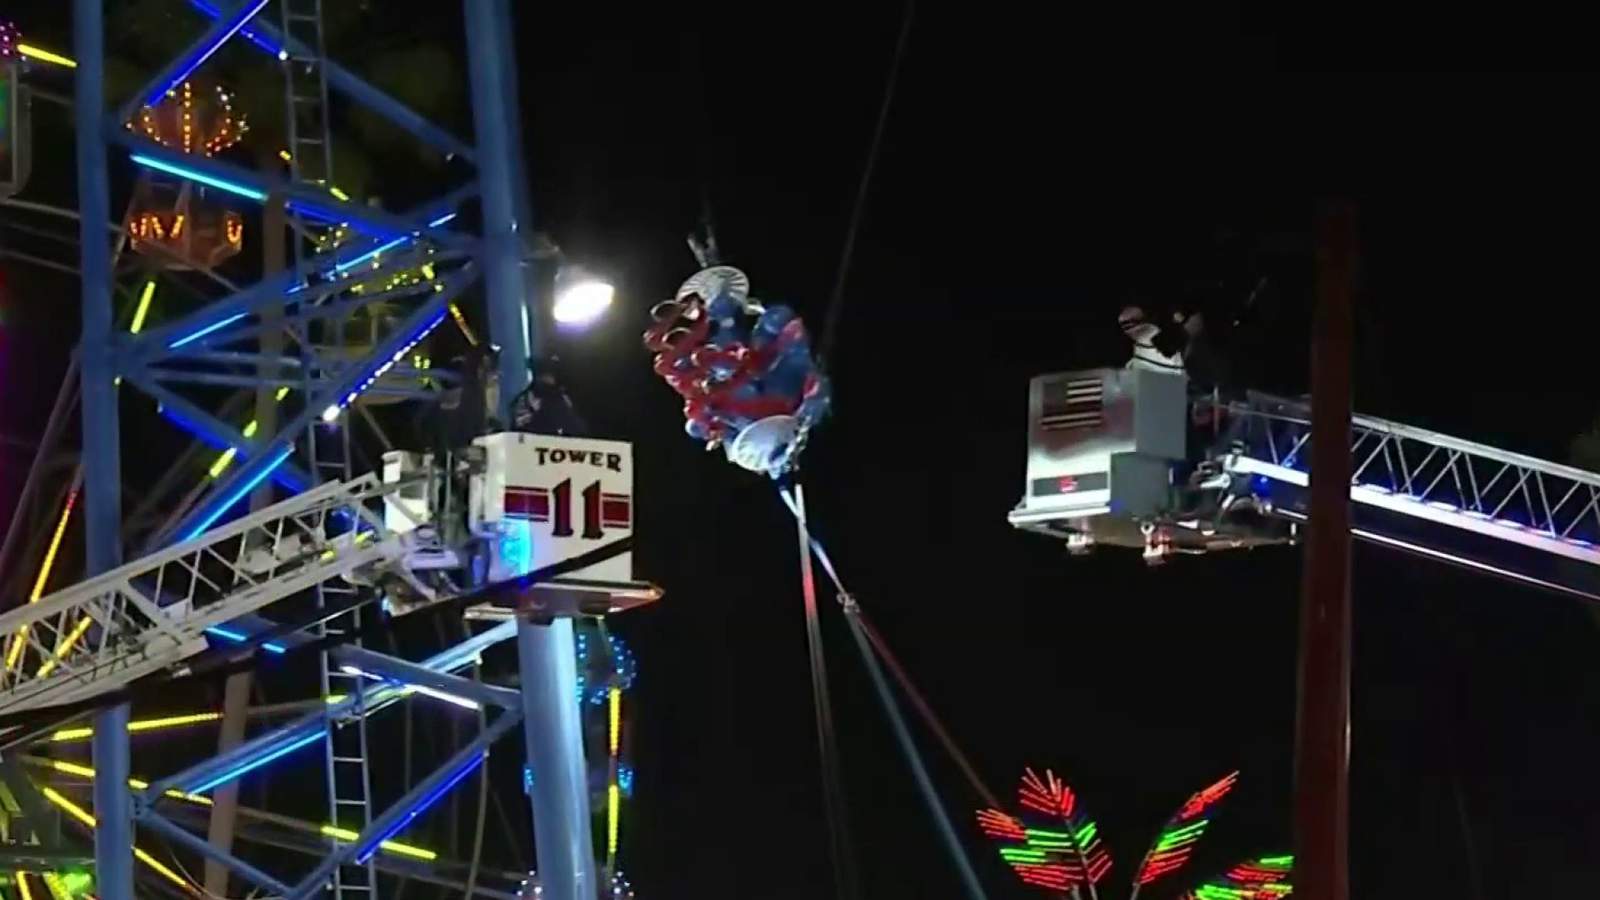 2 teens rescued from Kissimmee slingshot ride after cable breaks